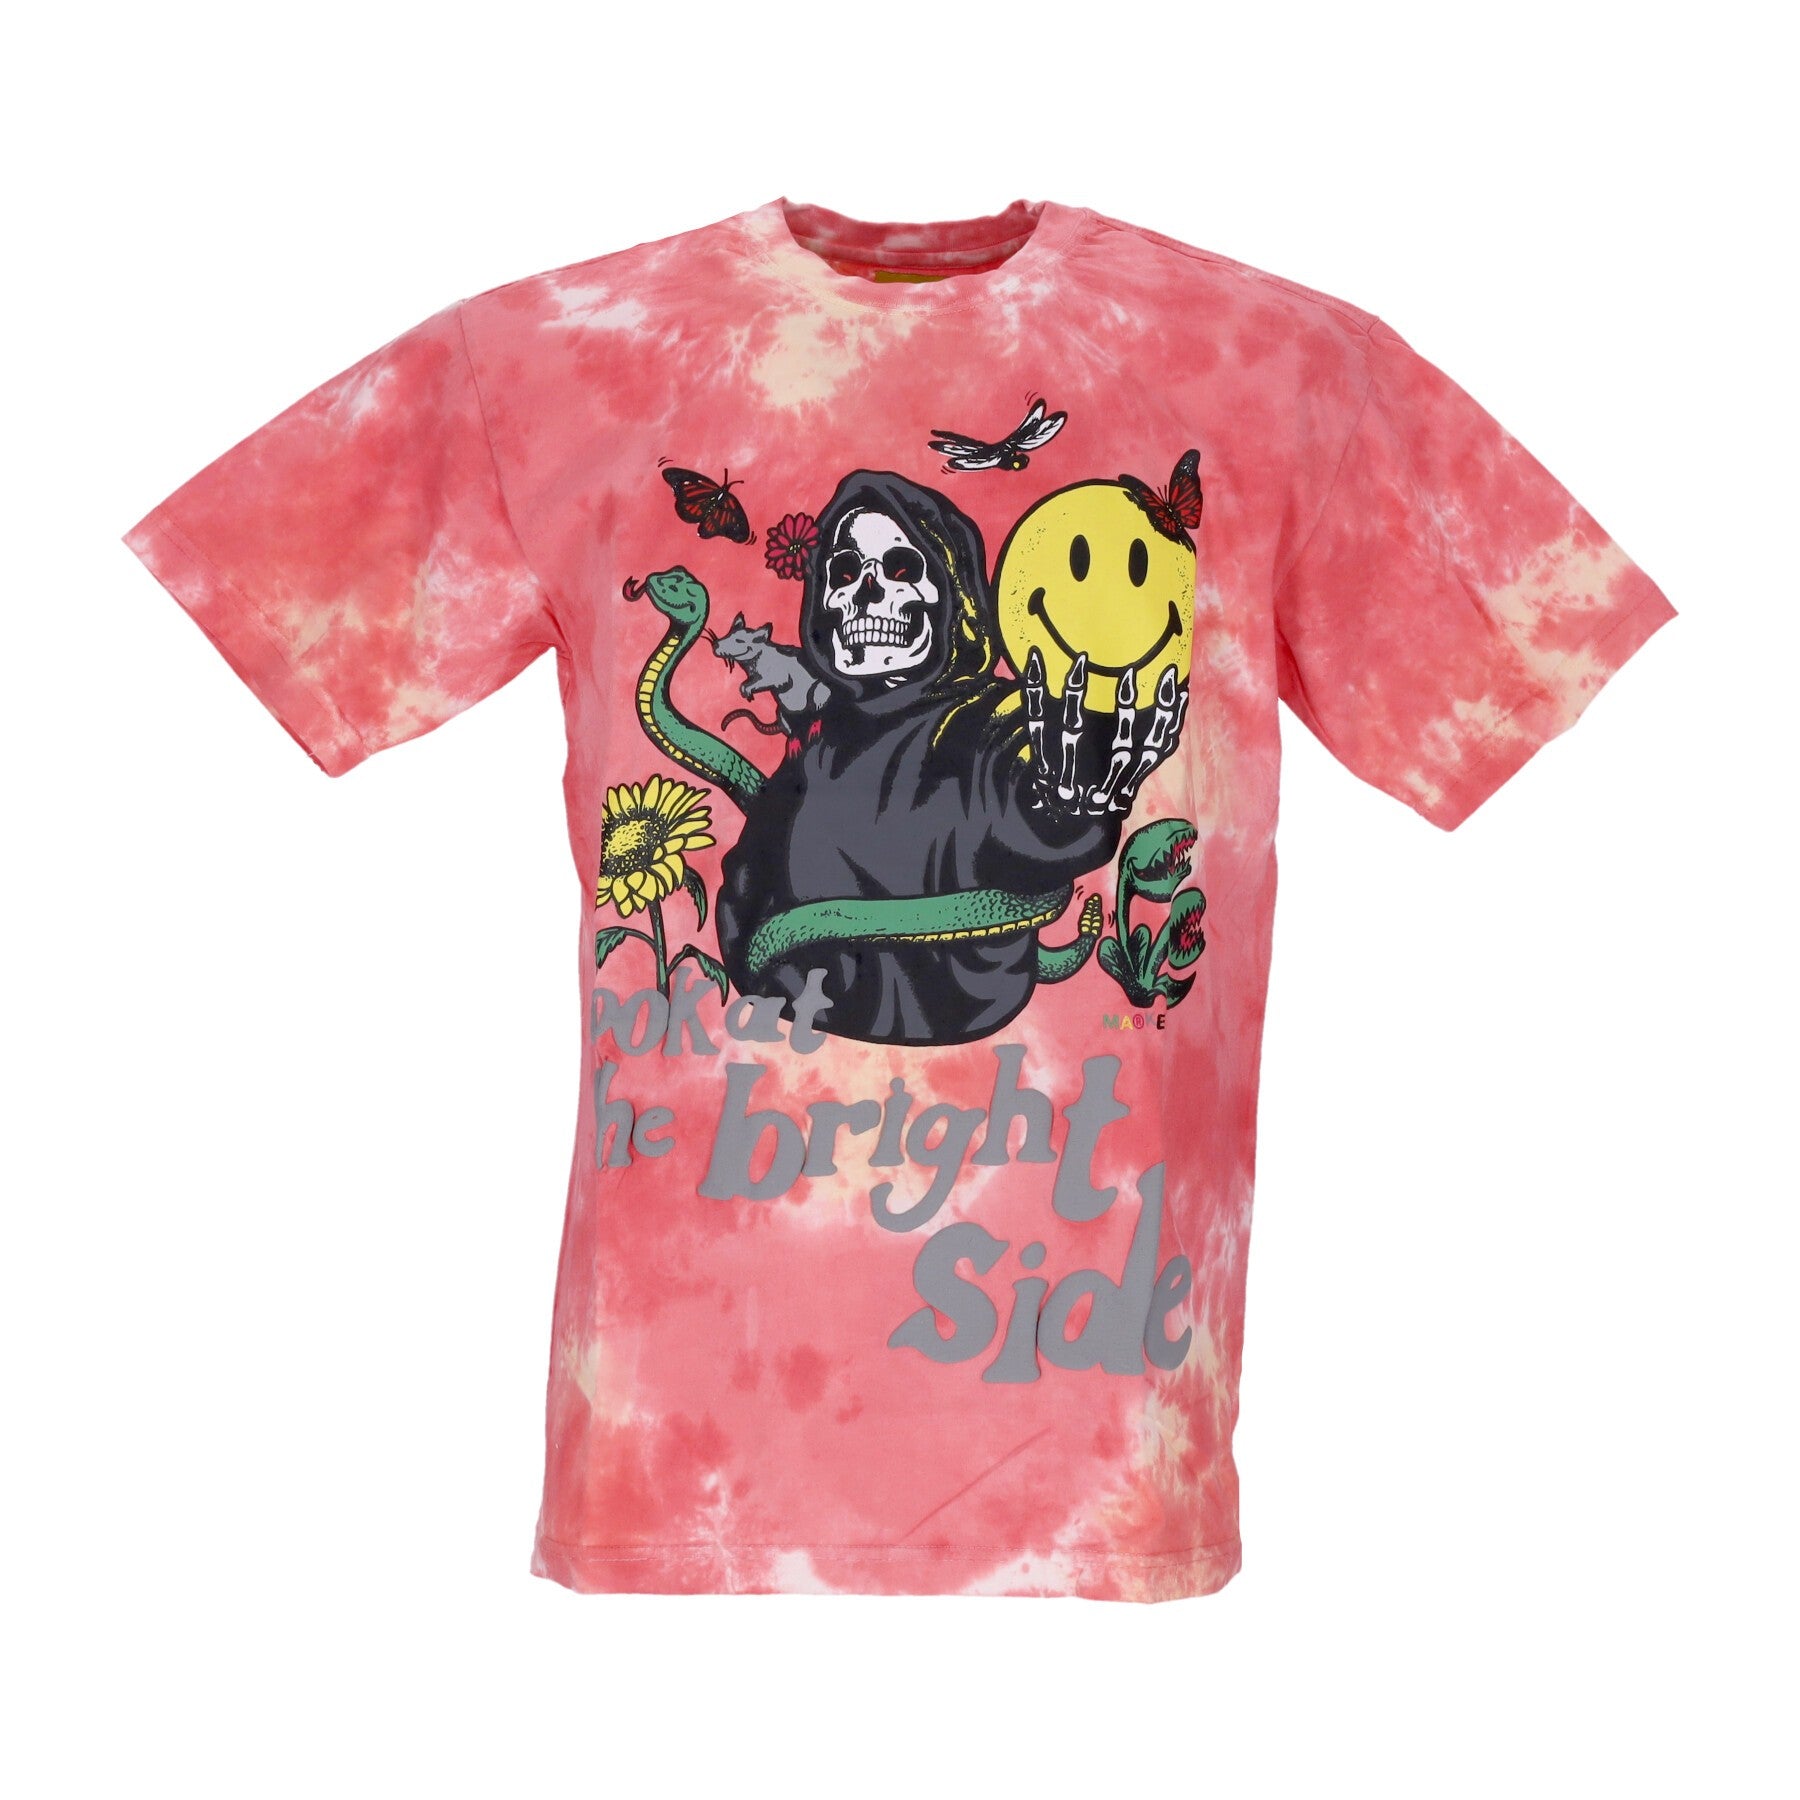 Maglietta Uomo Look At The Bright Side Tee X Smiley Pink Tie Dye